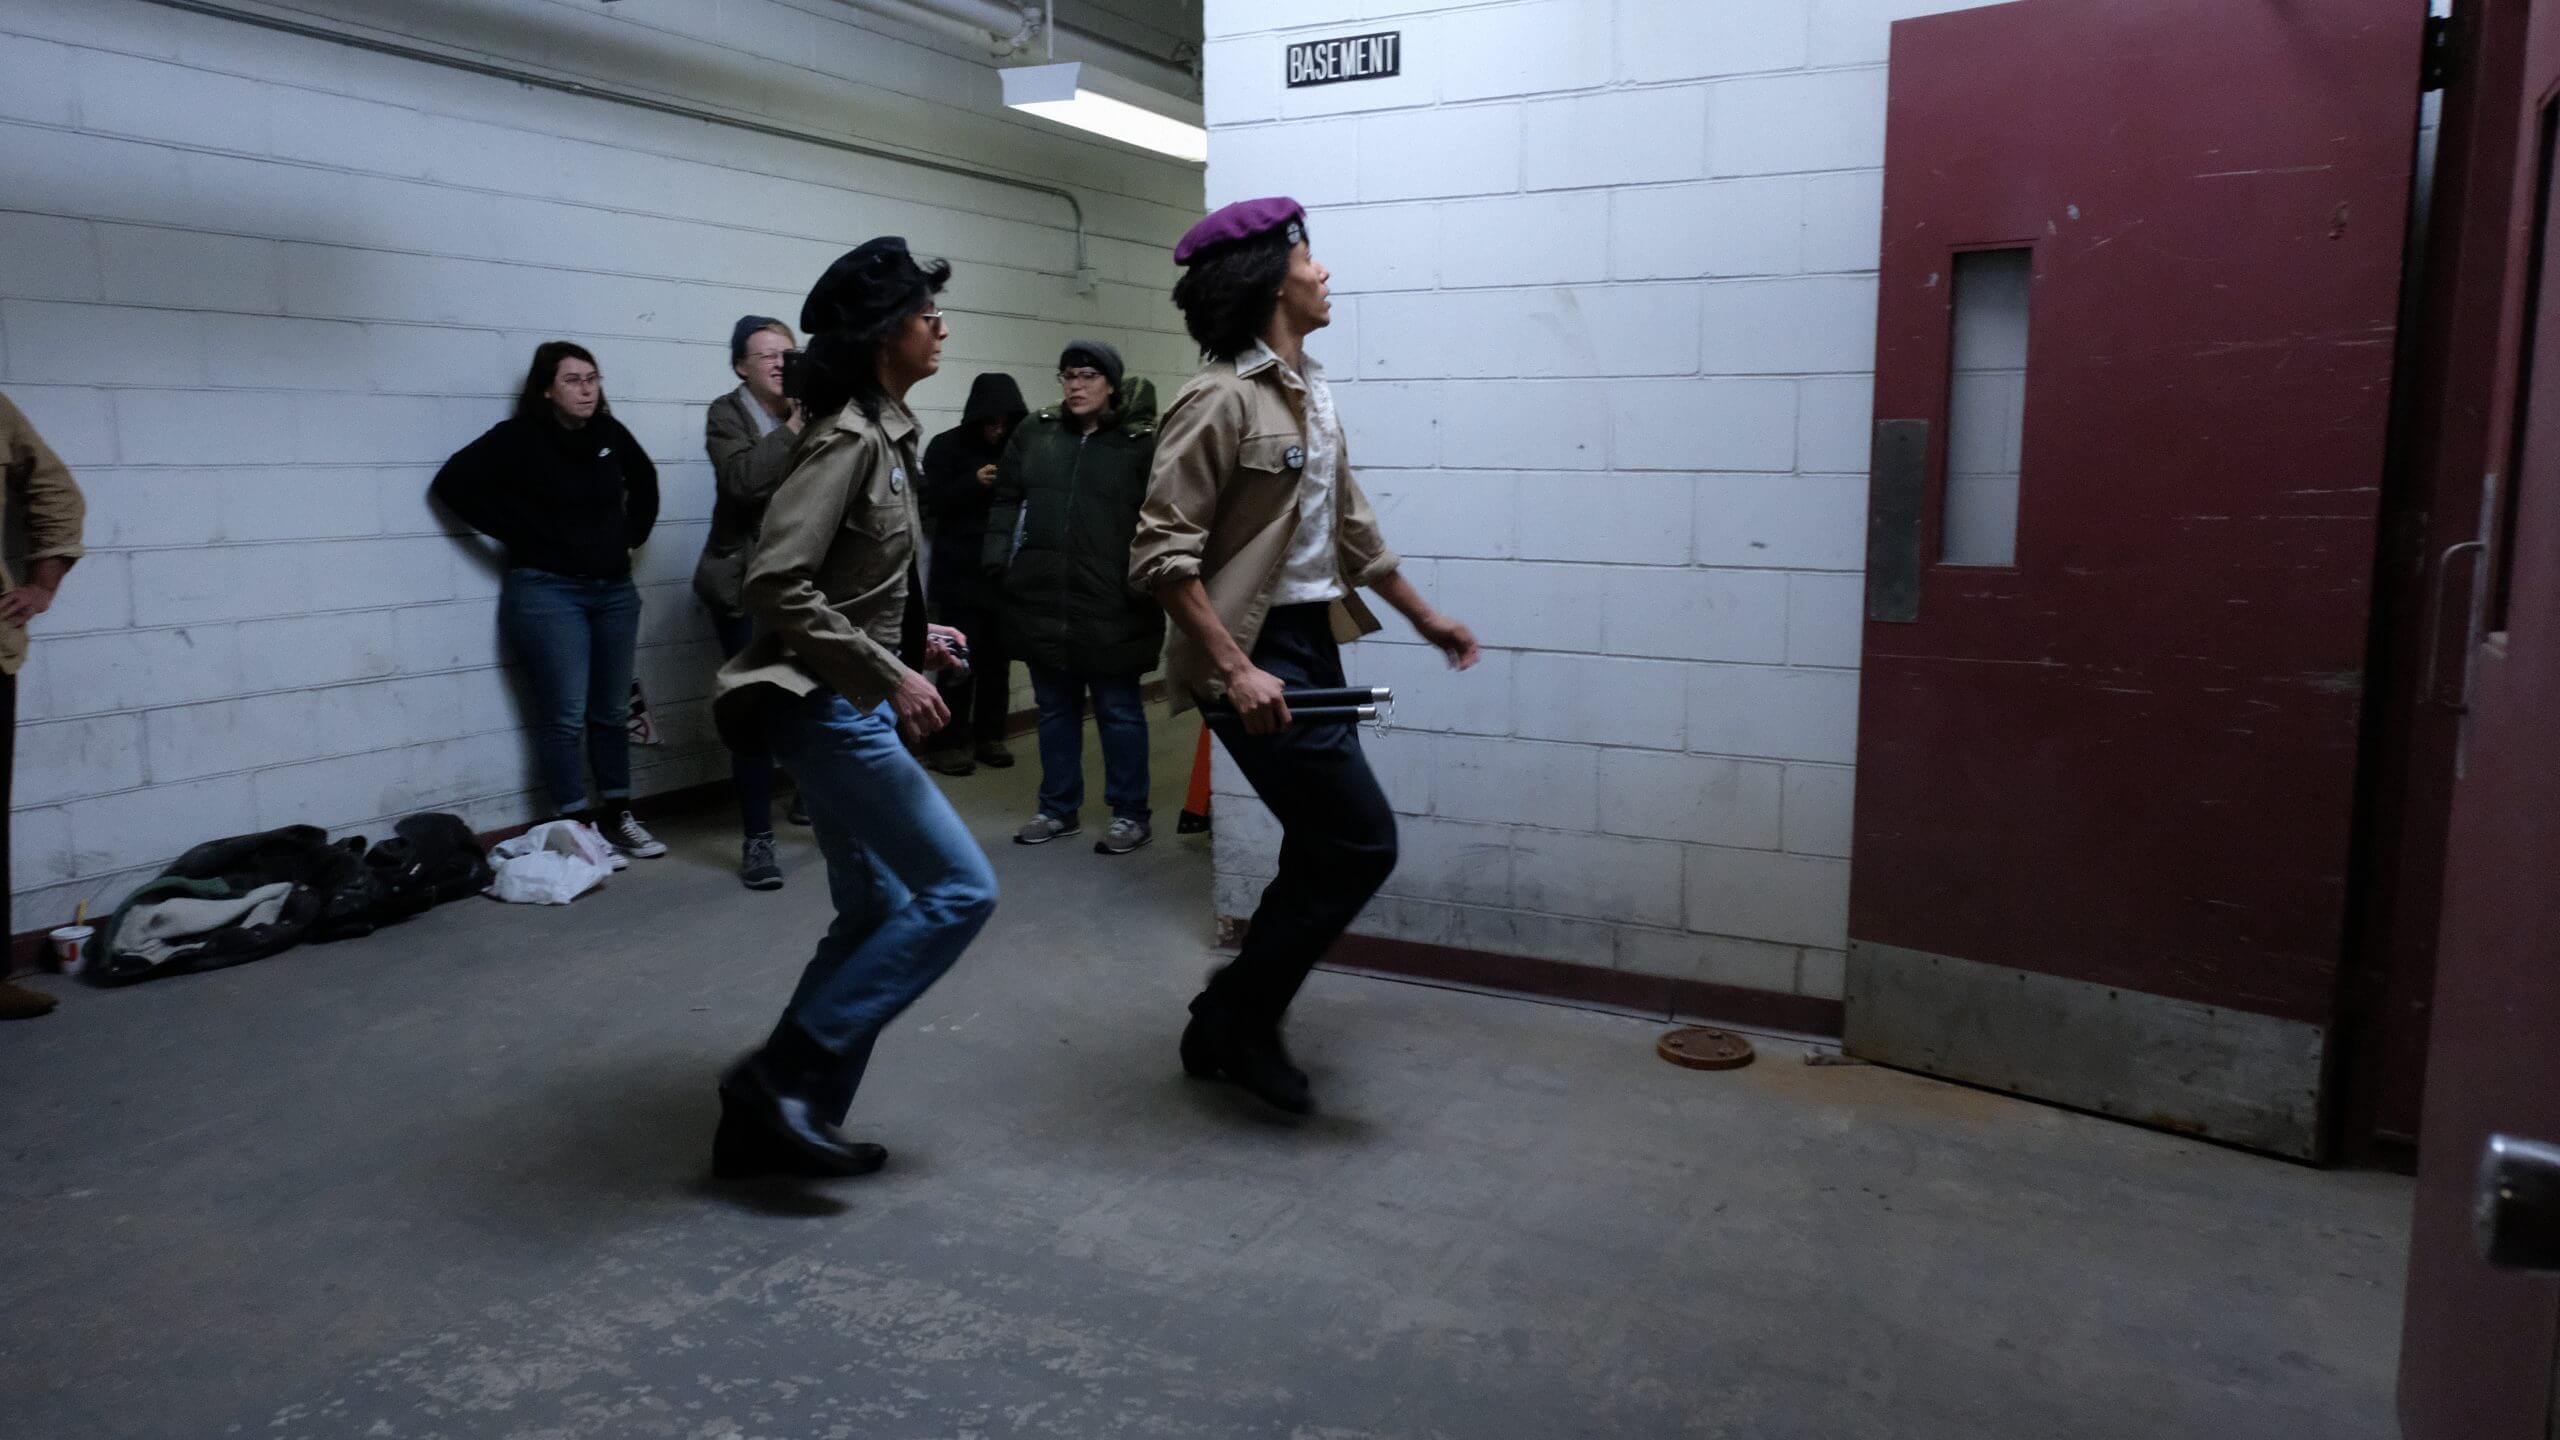 Two actors dressed as members of the Young Lords Party walking very fast